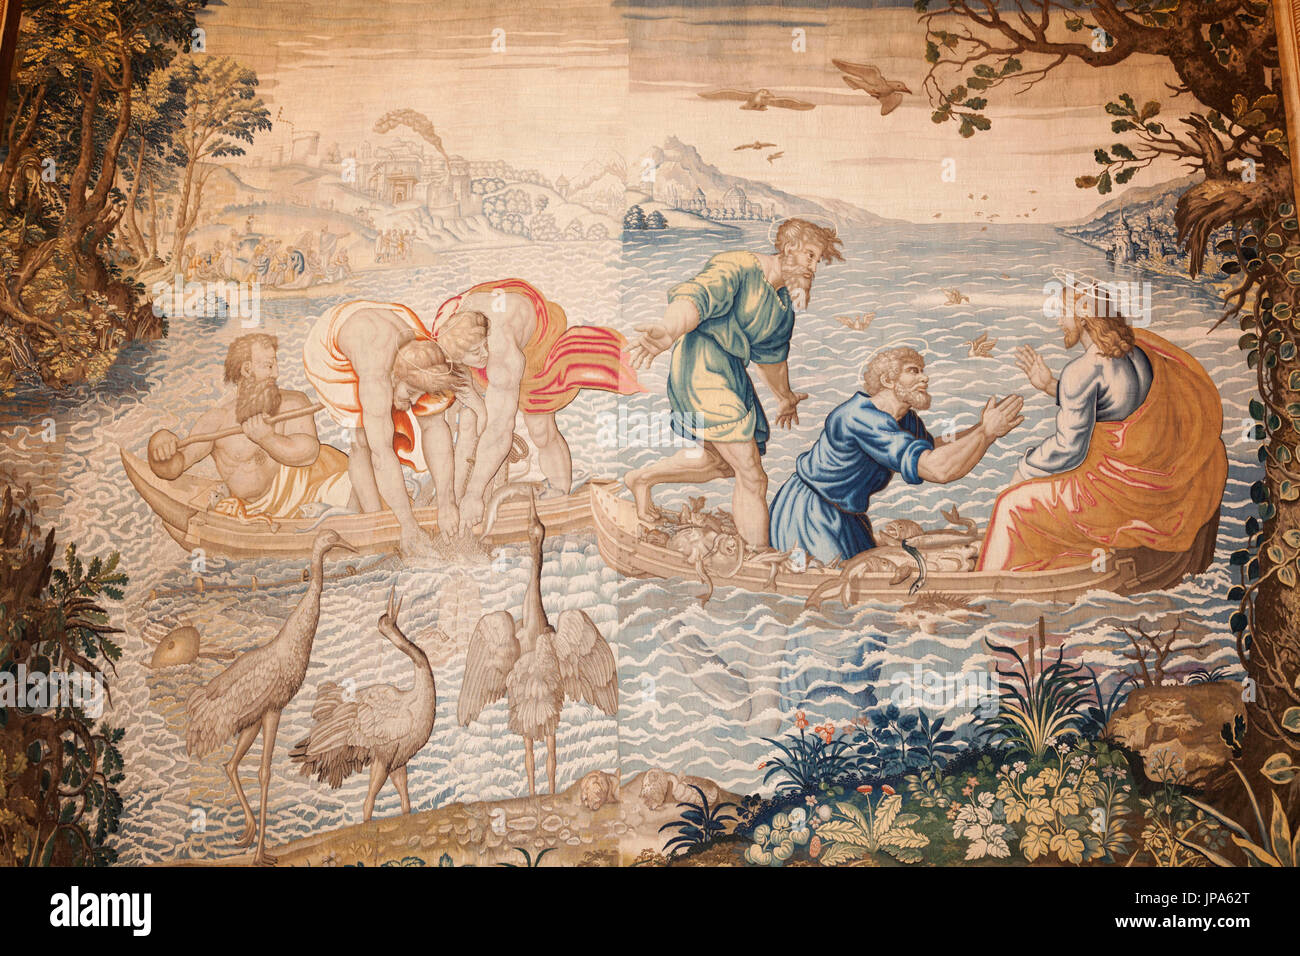 England, Middlesex, London, Kingston-upon-Thames, Hampton Court Palace, William III's Apartments, 17th century Belgian Tapestry Showing The Miraculous Draft of Fishes from The Acts of The Apostles Stock Photo